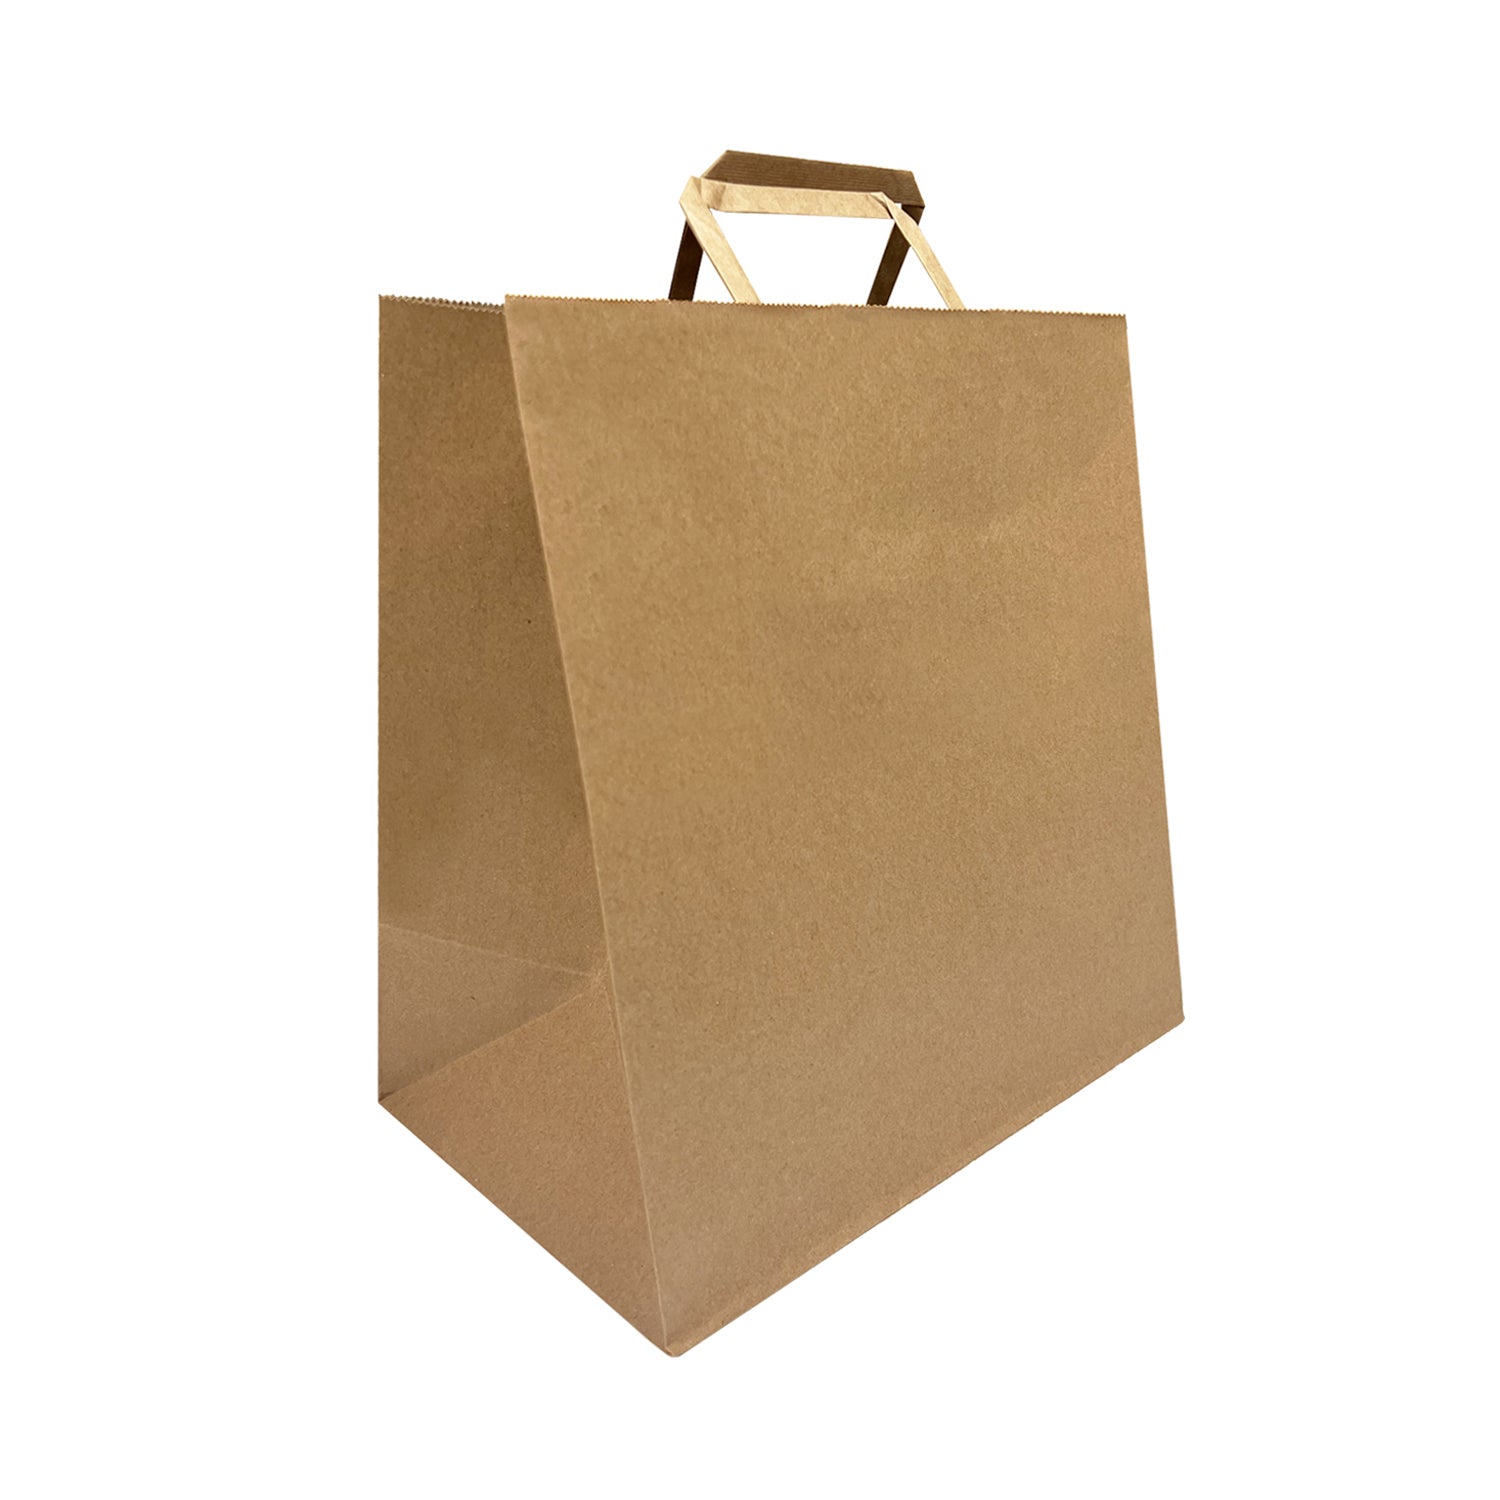 300 Pcs, Pluto,  12x7x12 inches, Kraft Paper Bags, with Flat Handle